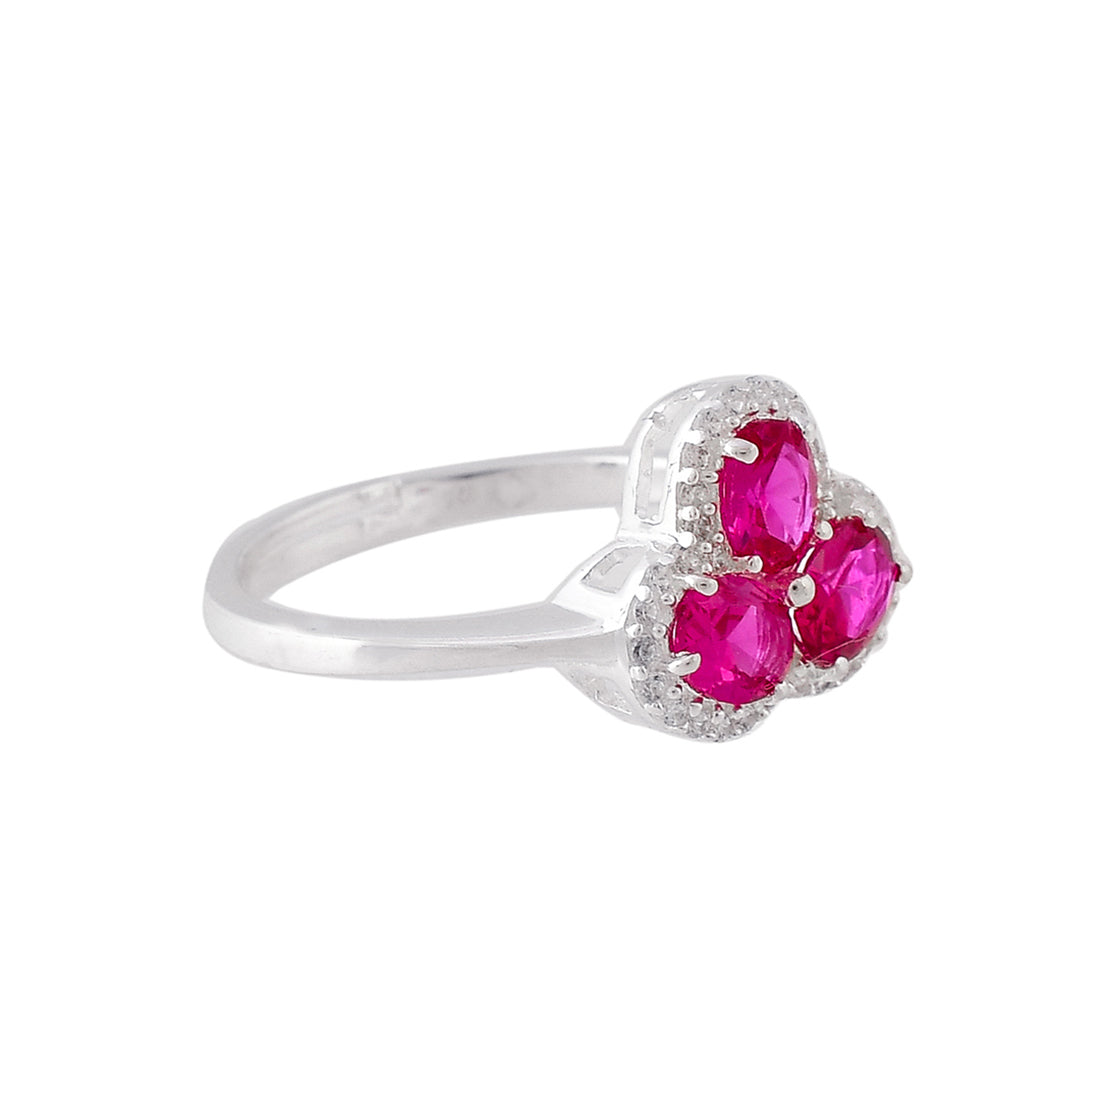 Women's Pink Round Cut Ruby Adjustable Sterling Silver Ring - Voylla